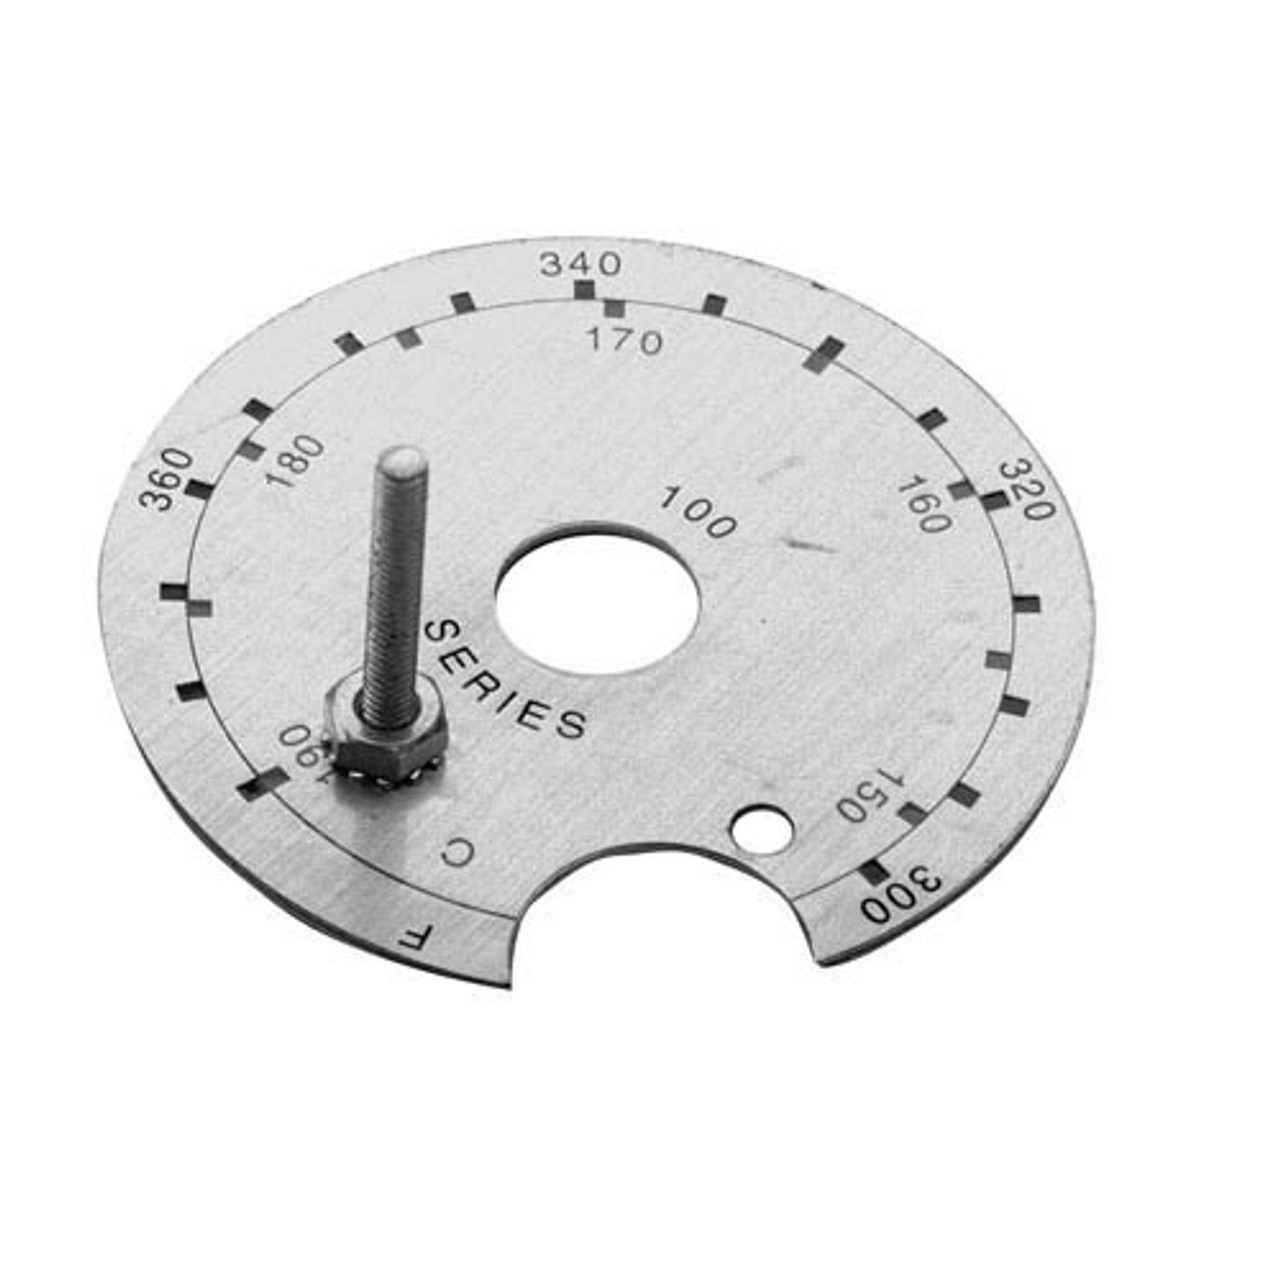 THERMOSTAT DIAL PLATE - FRYMASTER